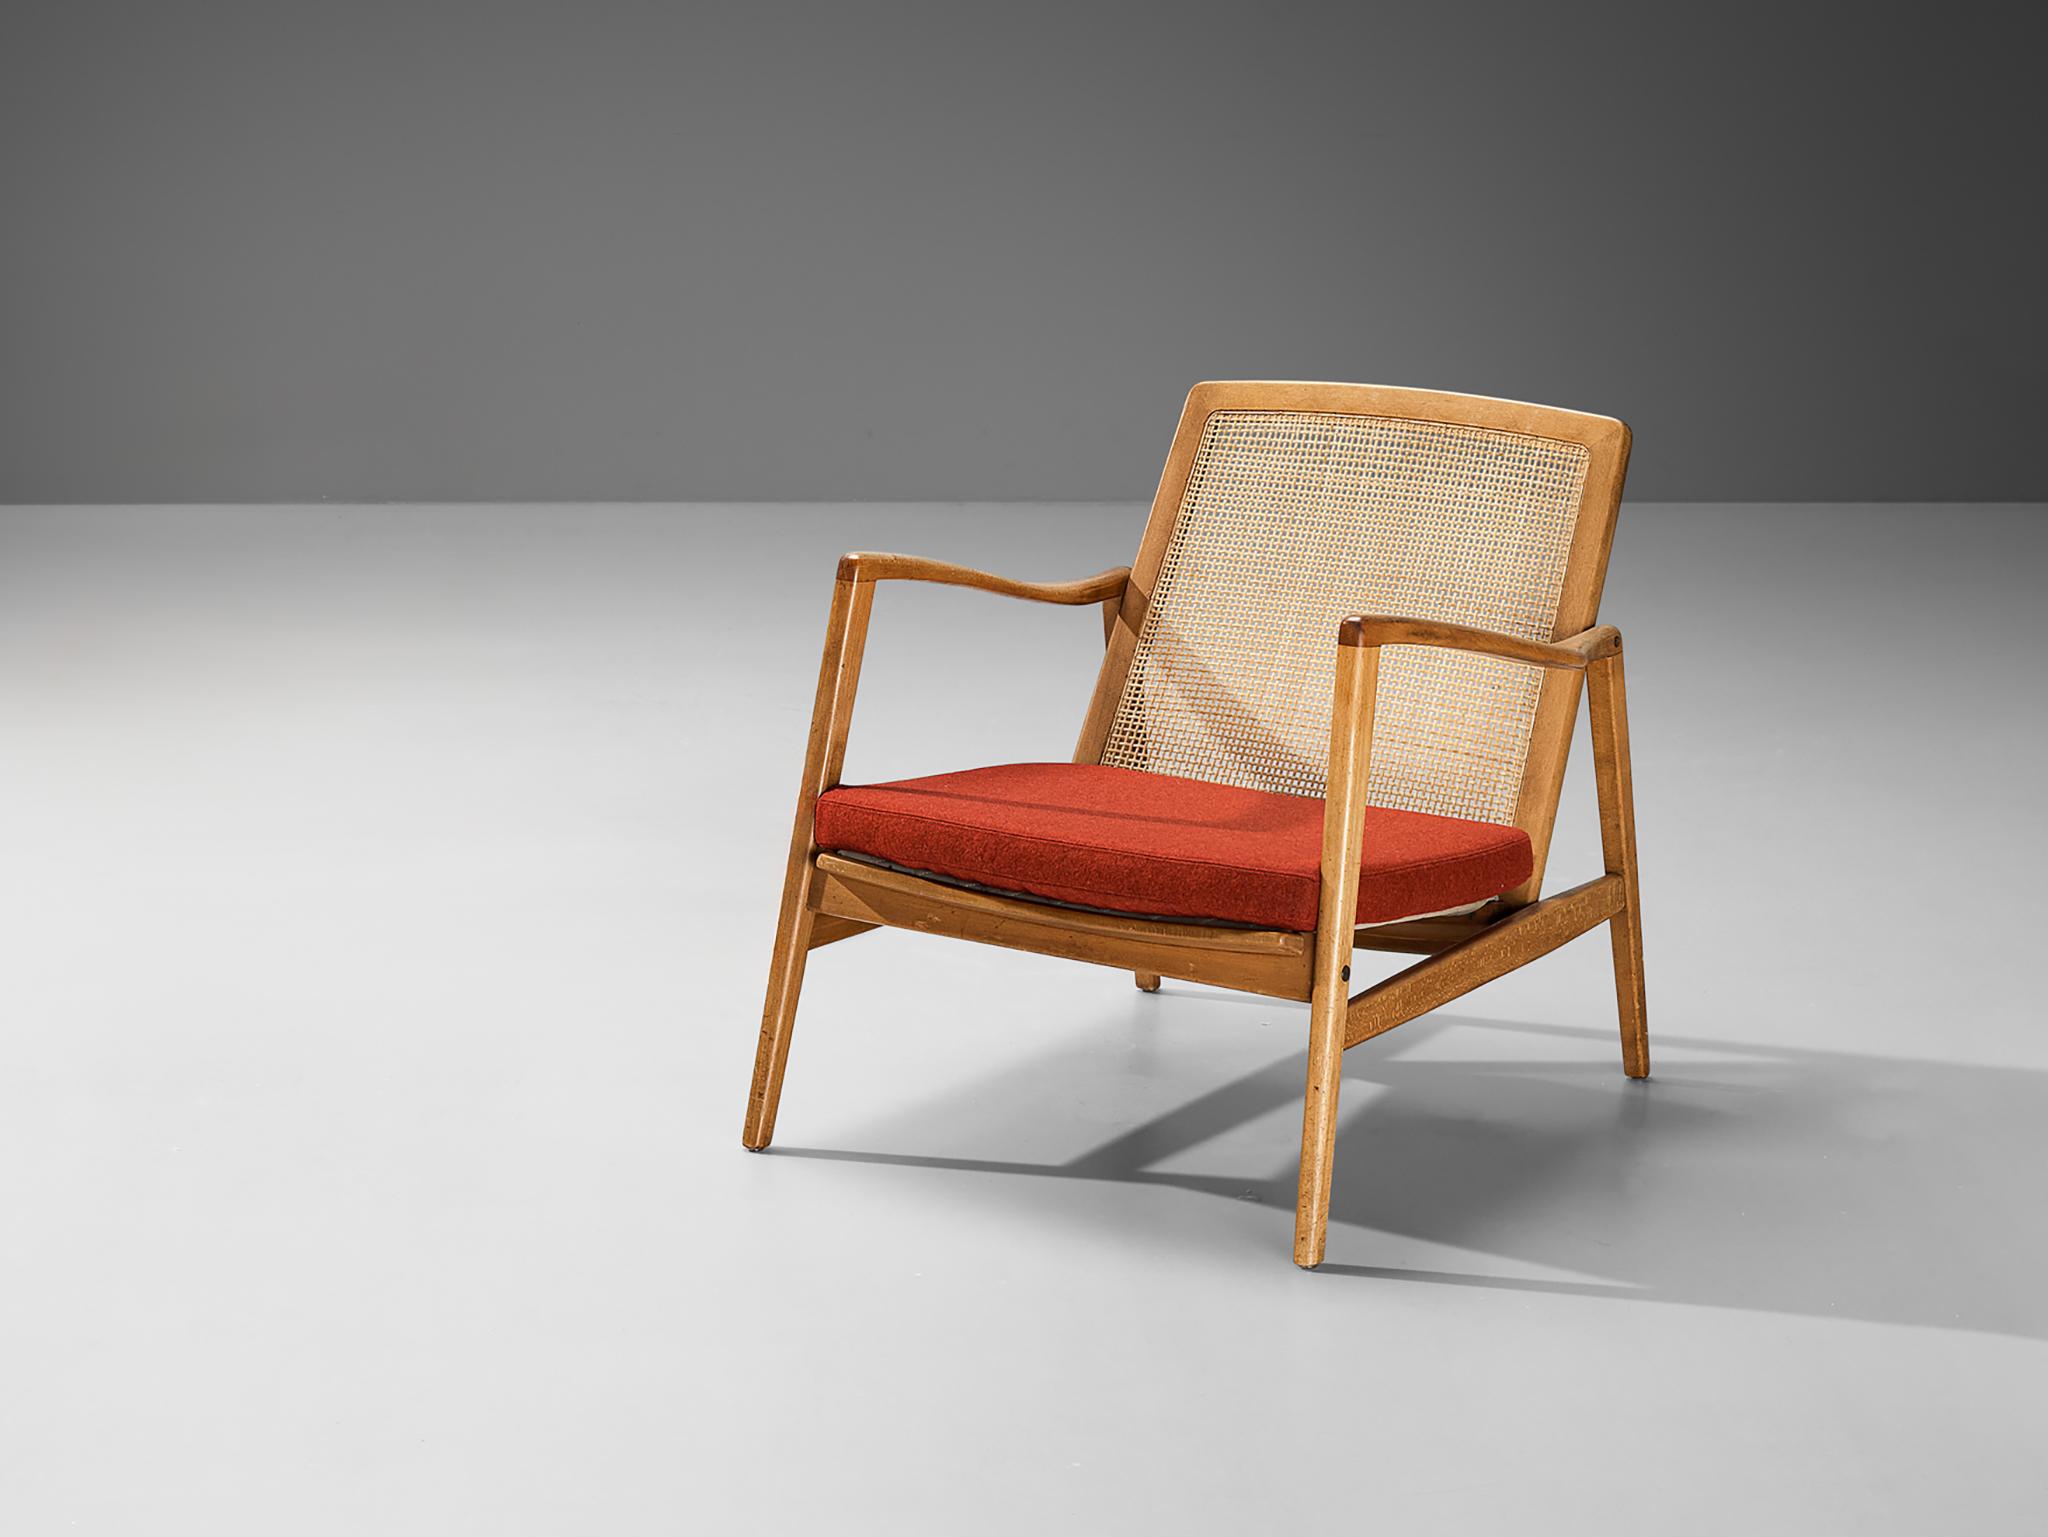 Hartmut Lohmeyer for Wilkhahn, lounge chair, walnut, beech, cane, fabric, Germany, 1956

This organic shaped lounge chair by Hartmut Lohmeyer showcase a wide open wooden frame with a gentle tilt in the back, adorned with cane. The softly curved